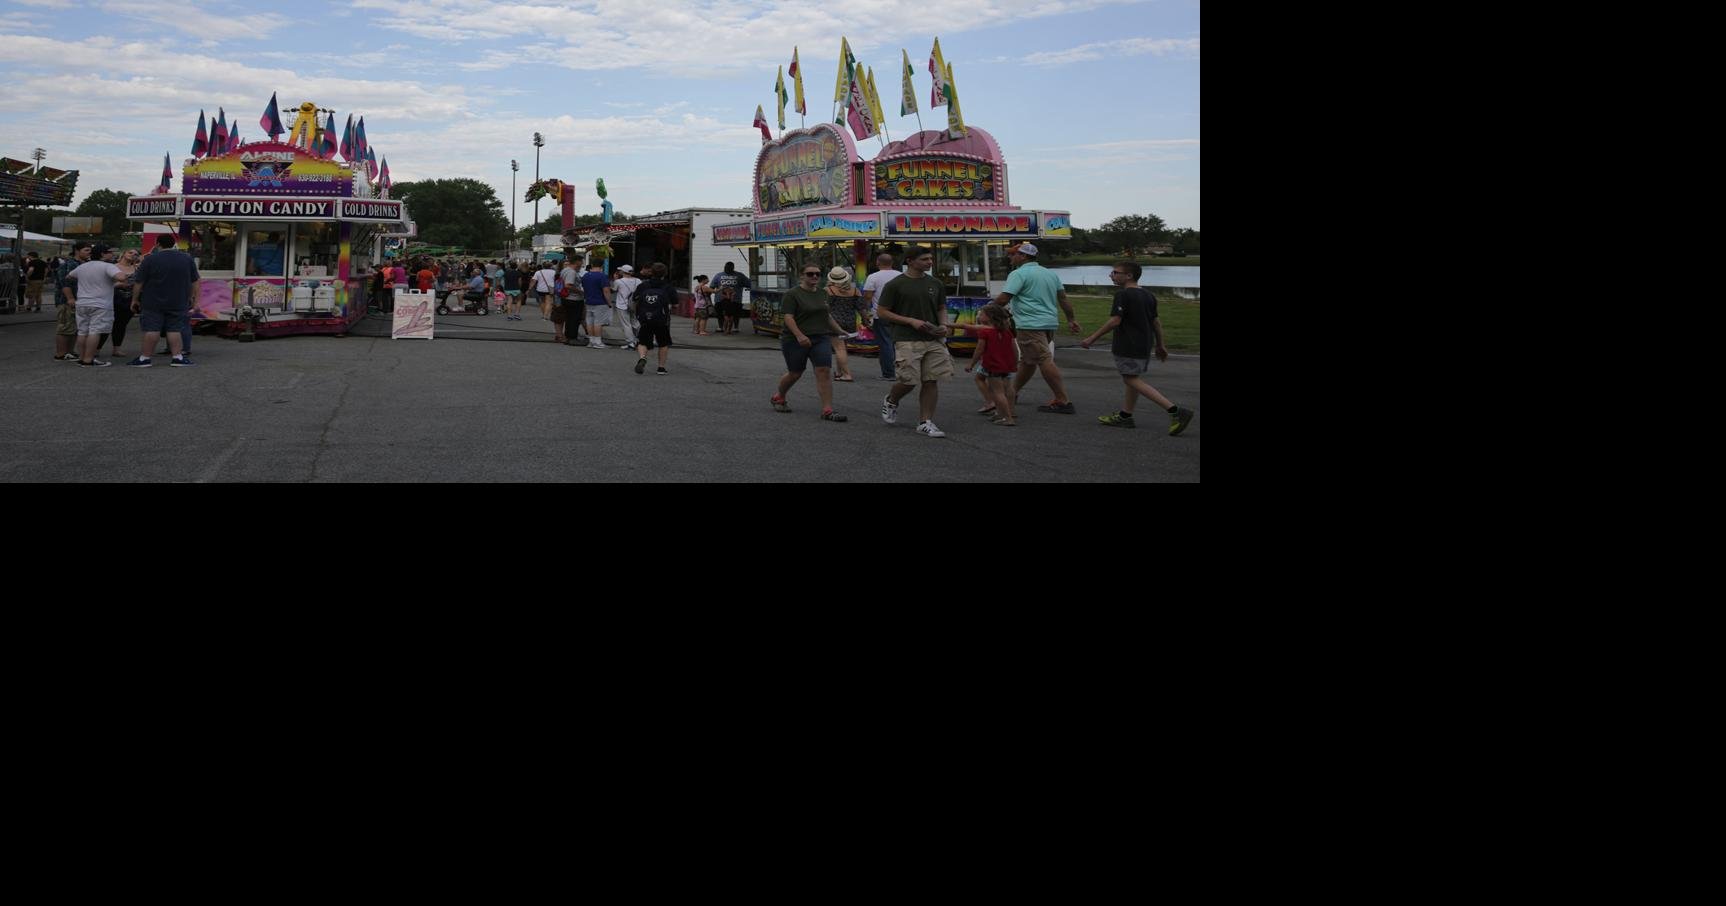 Dyer fest kicks off summer season with games, rides, entertainment at